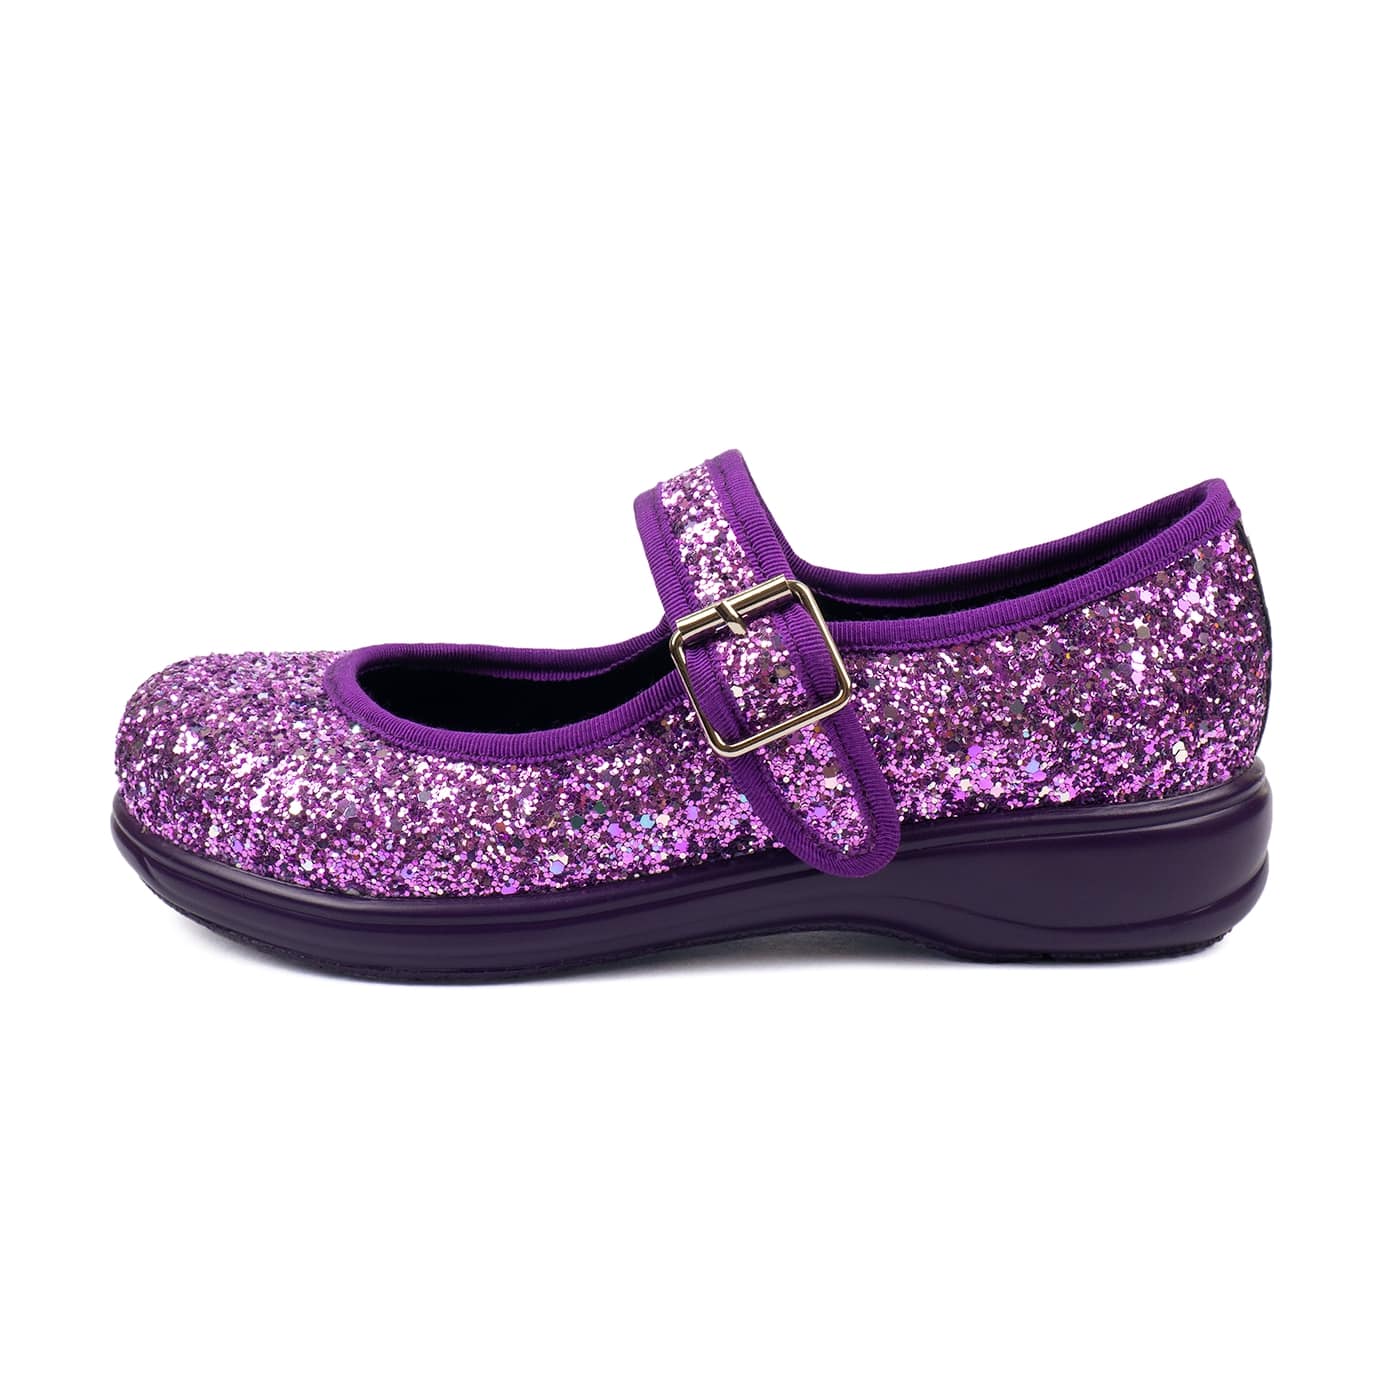 Amethyst Mary Janes by RainbowsAndFairies.com (Purple Glitter - Sparkle - Shoes - Buckle Up - Lilac) - SKU: FW_MARYJ_AMTHS_ORG - Pic 03